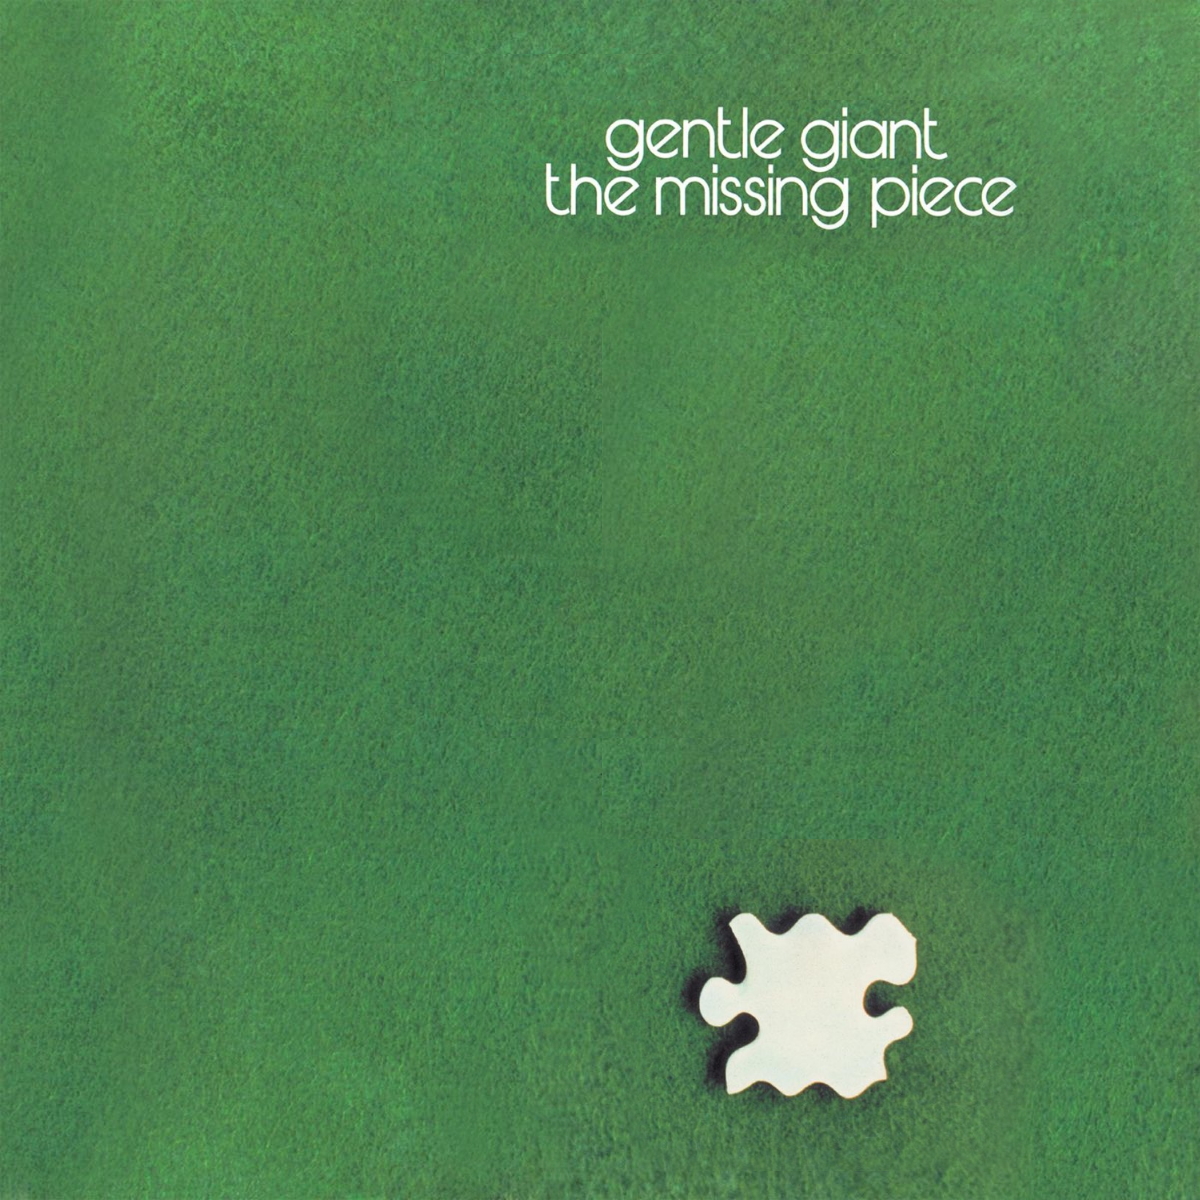 Gentle Giant - The Missing Piece (1977)